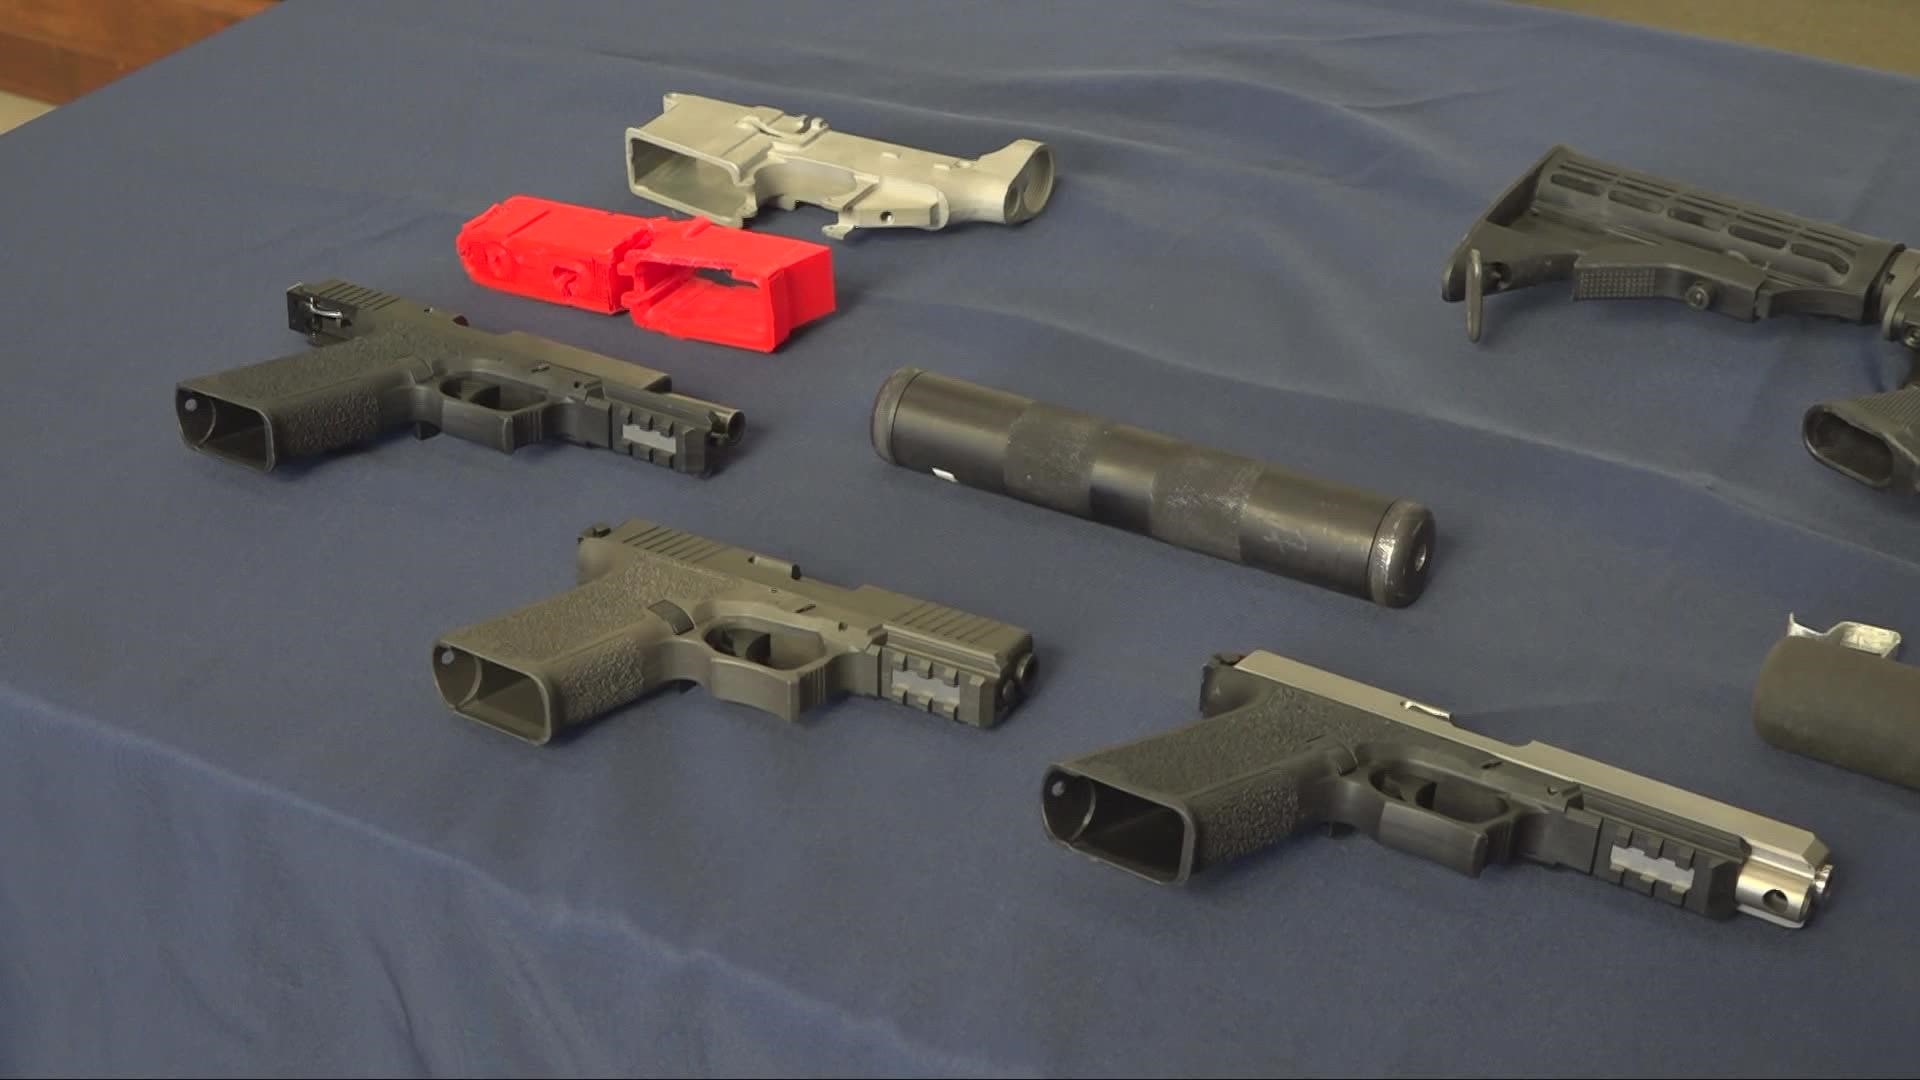 The Sacramento Police Department is working toward multiple solutions to get ghost guns off the streets.